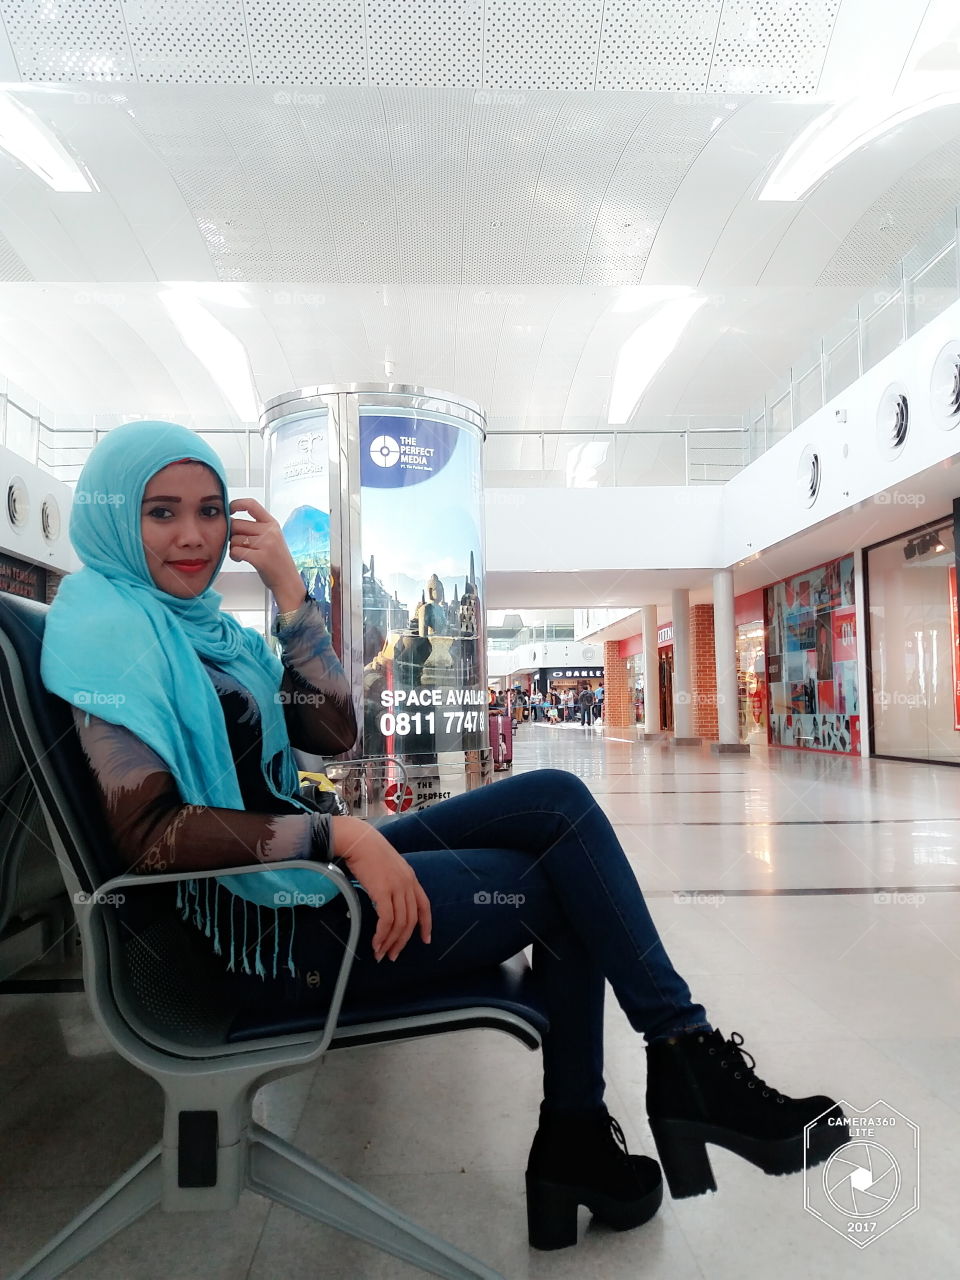 Young woman in hijab sitting on bench at shopping mall